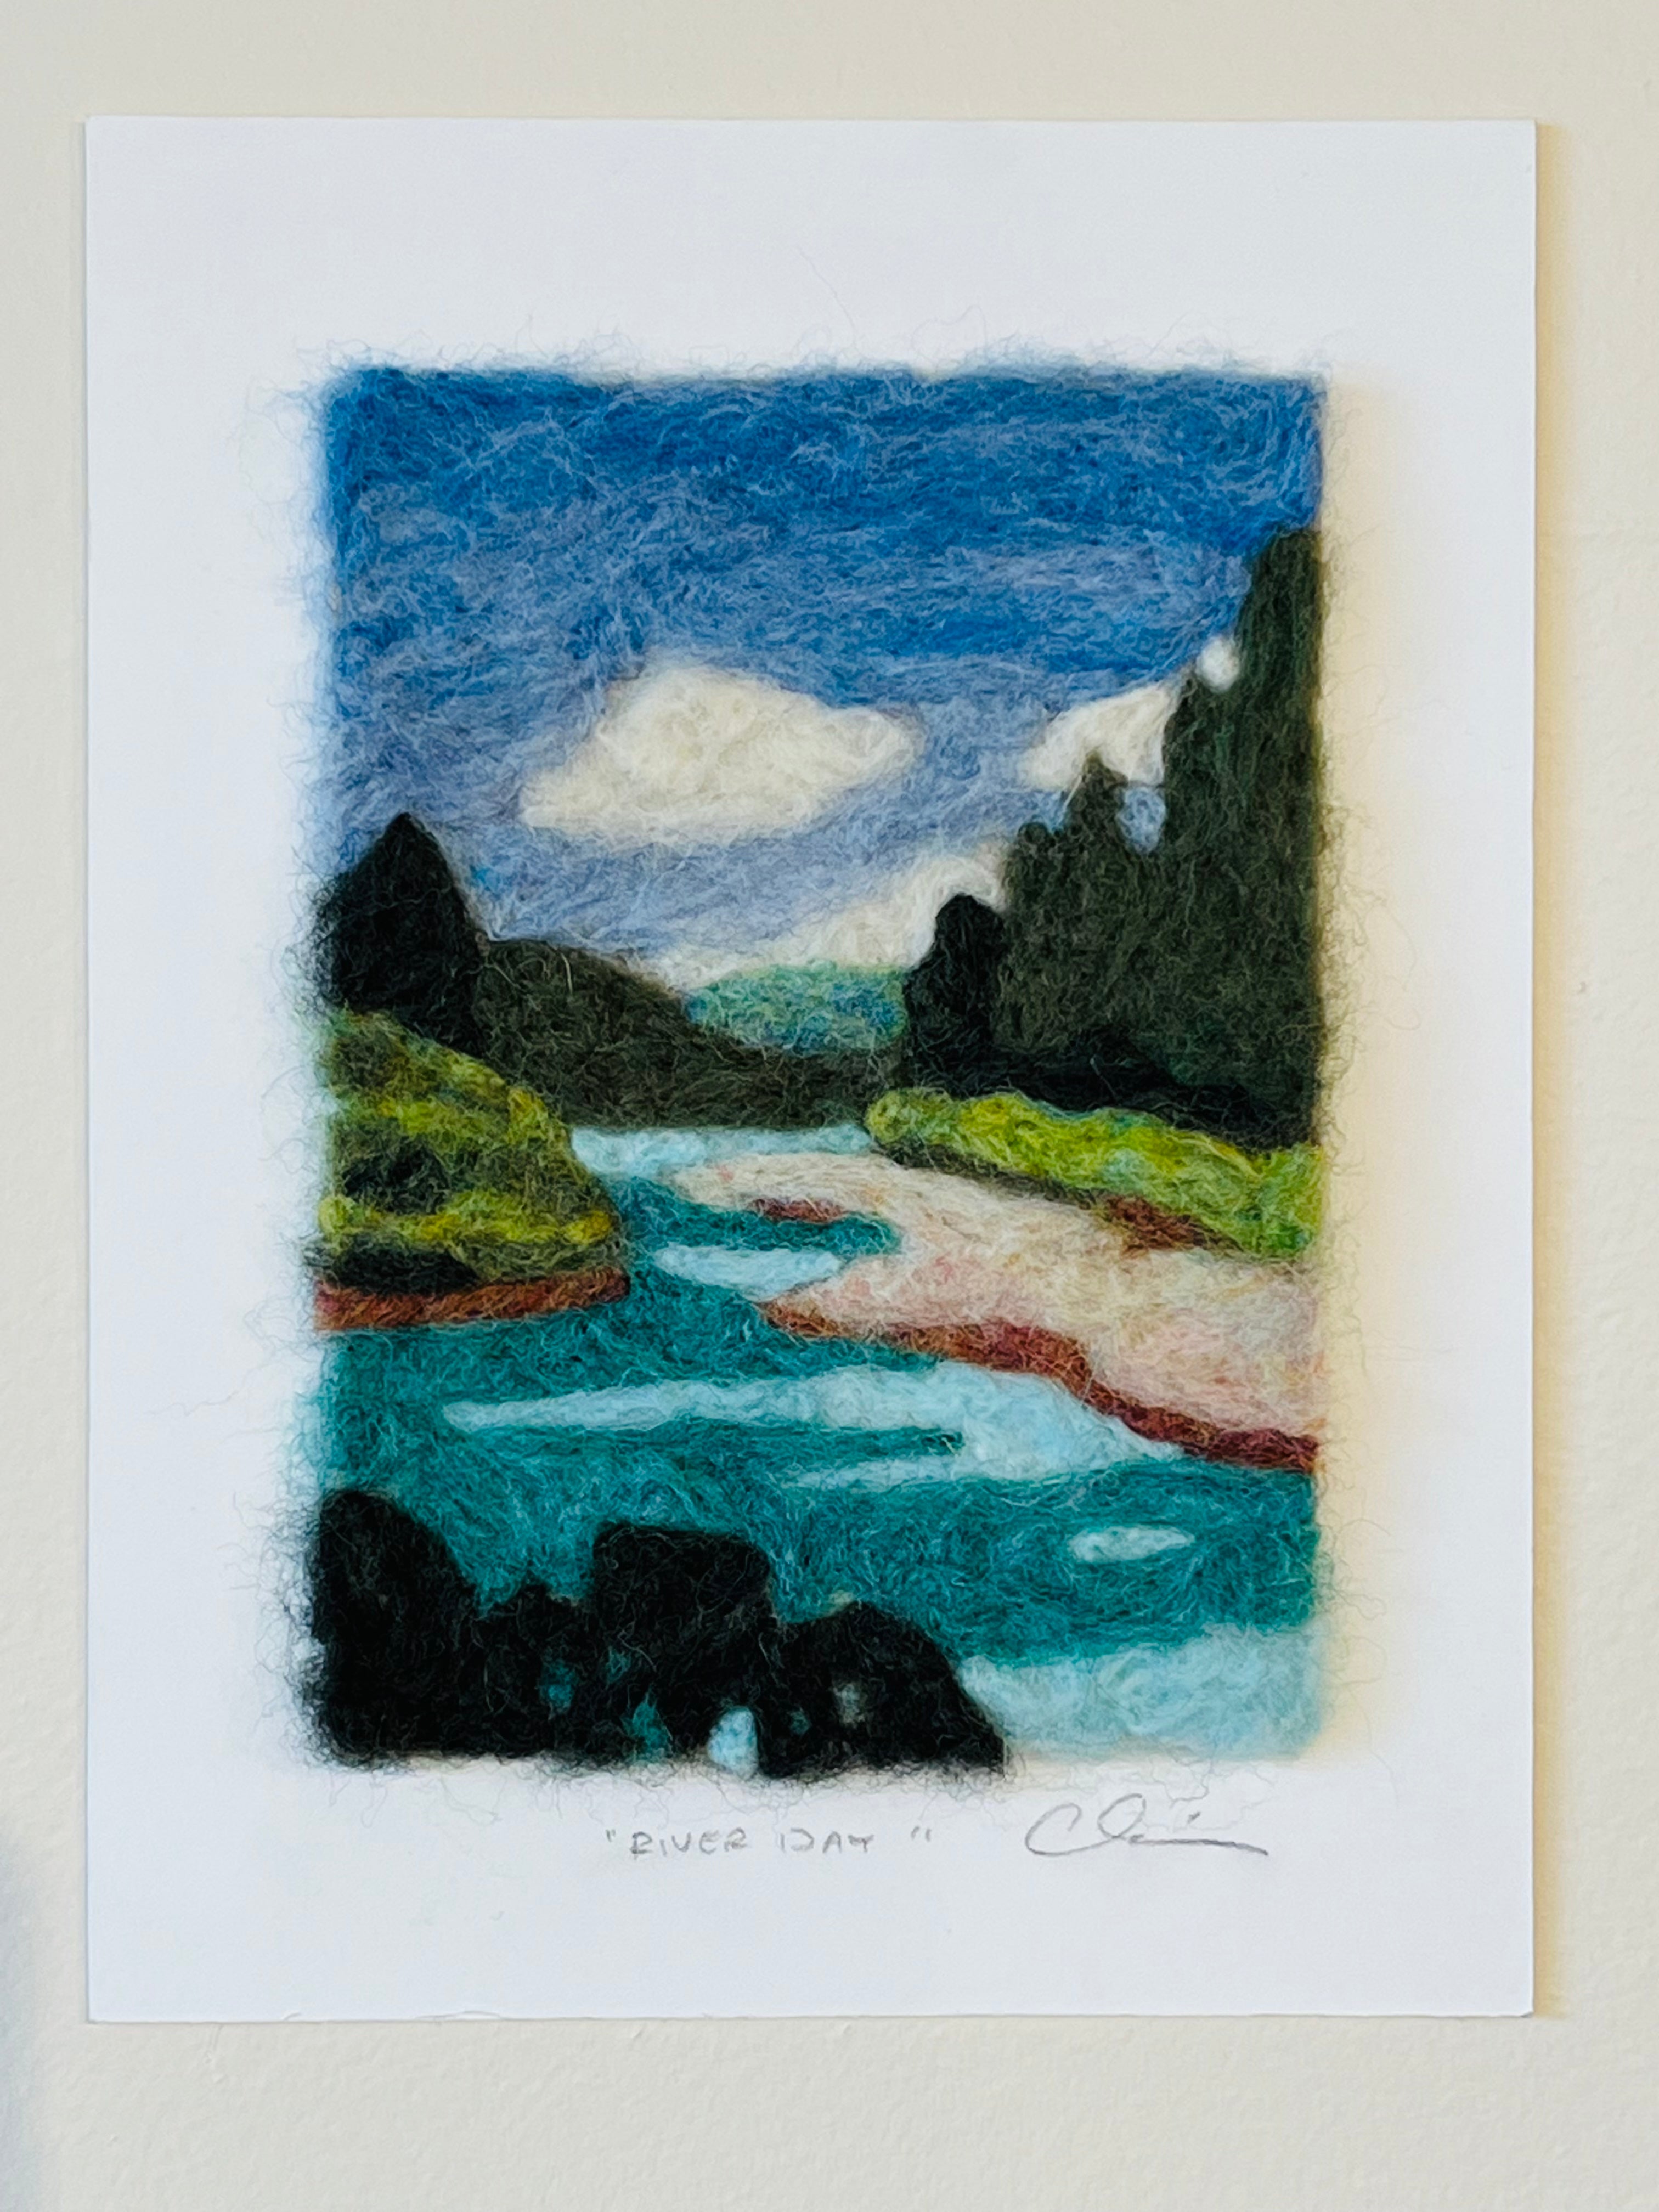 River Day - needle felting kit from Claire Astra Studios